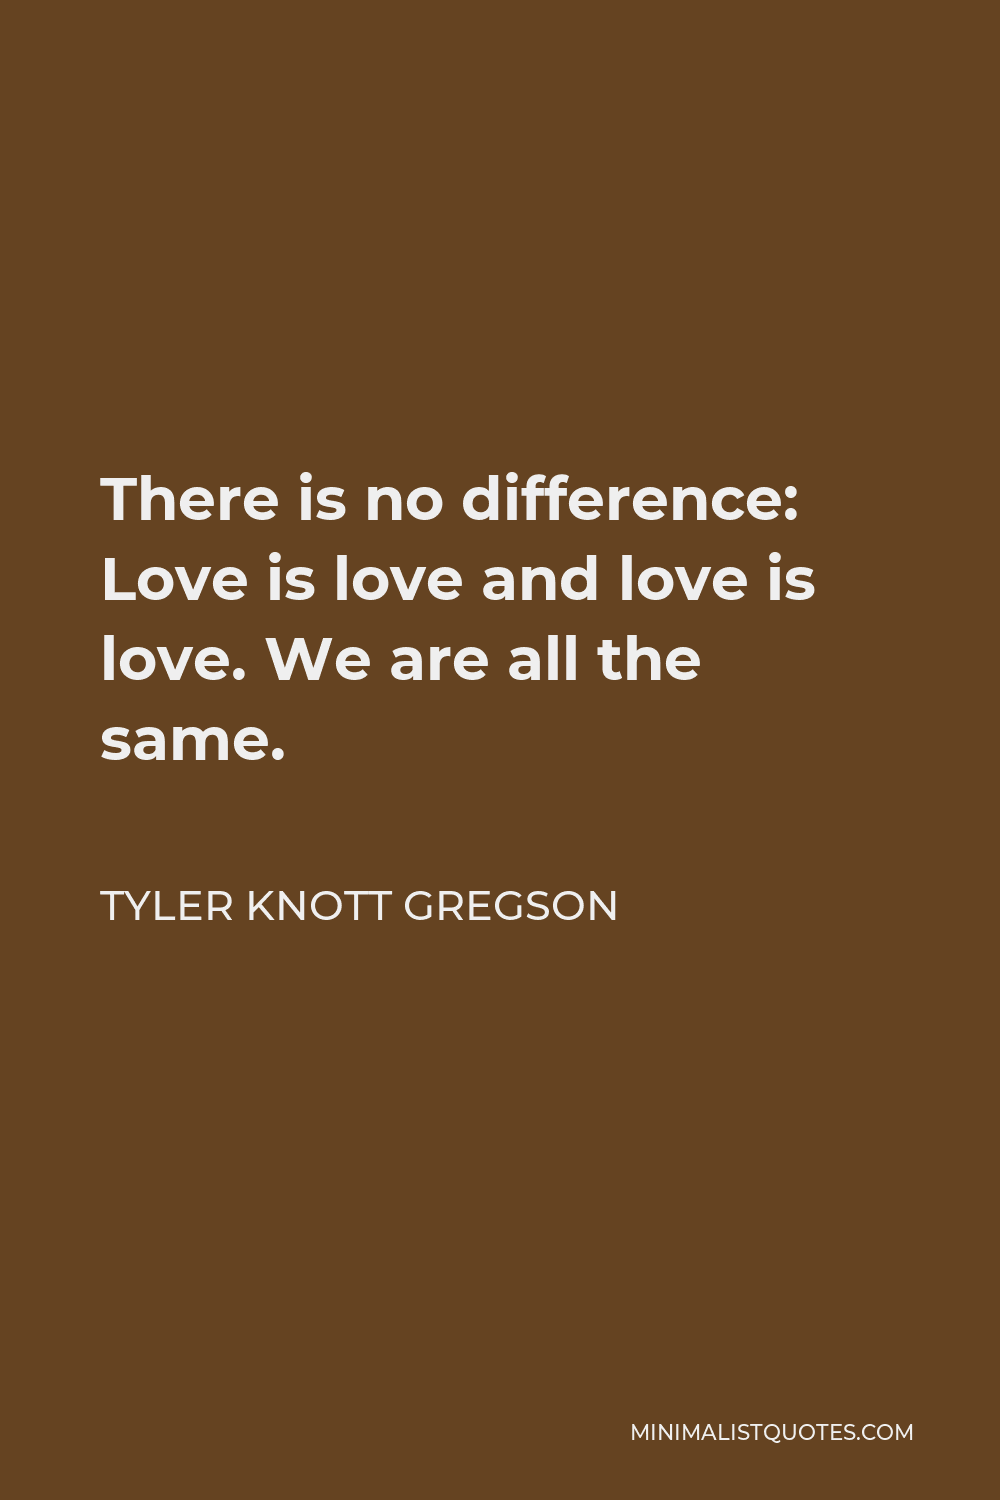 Tyler Knott Gregson Quote: There is no difference: Love is love and ...